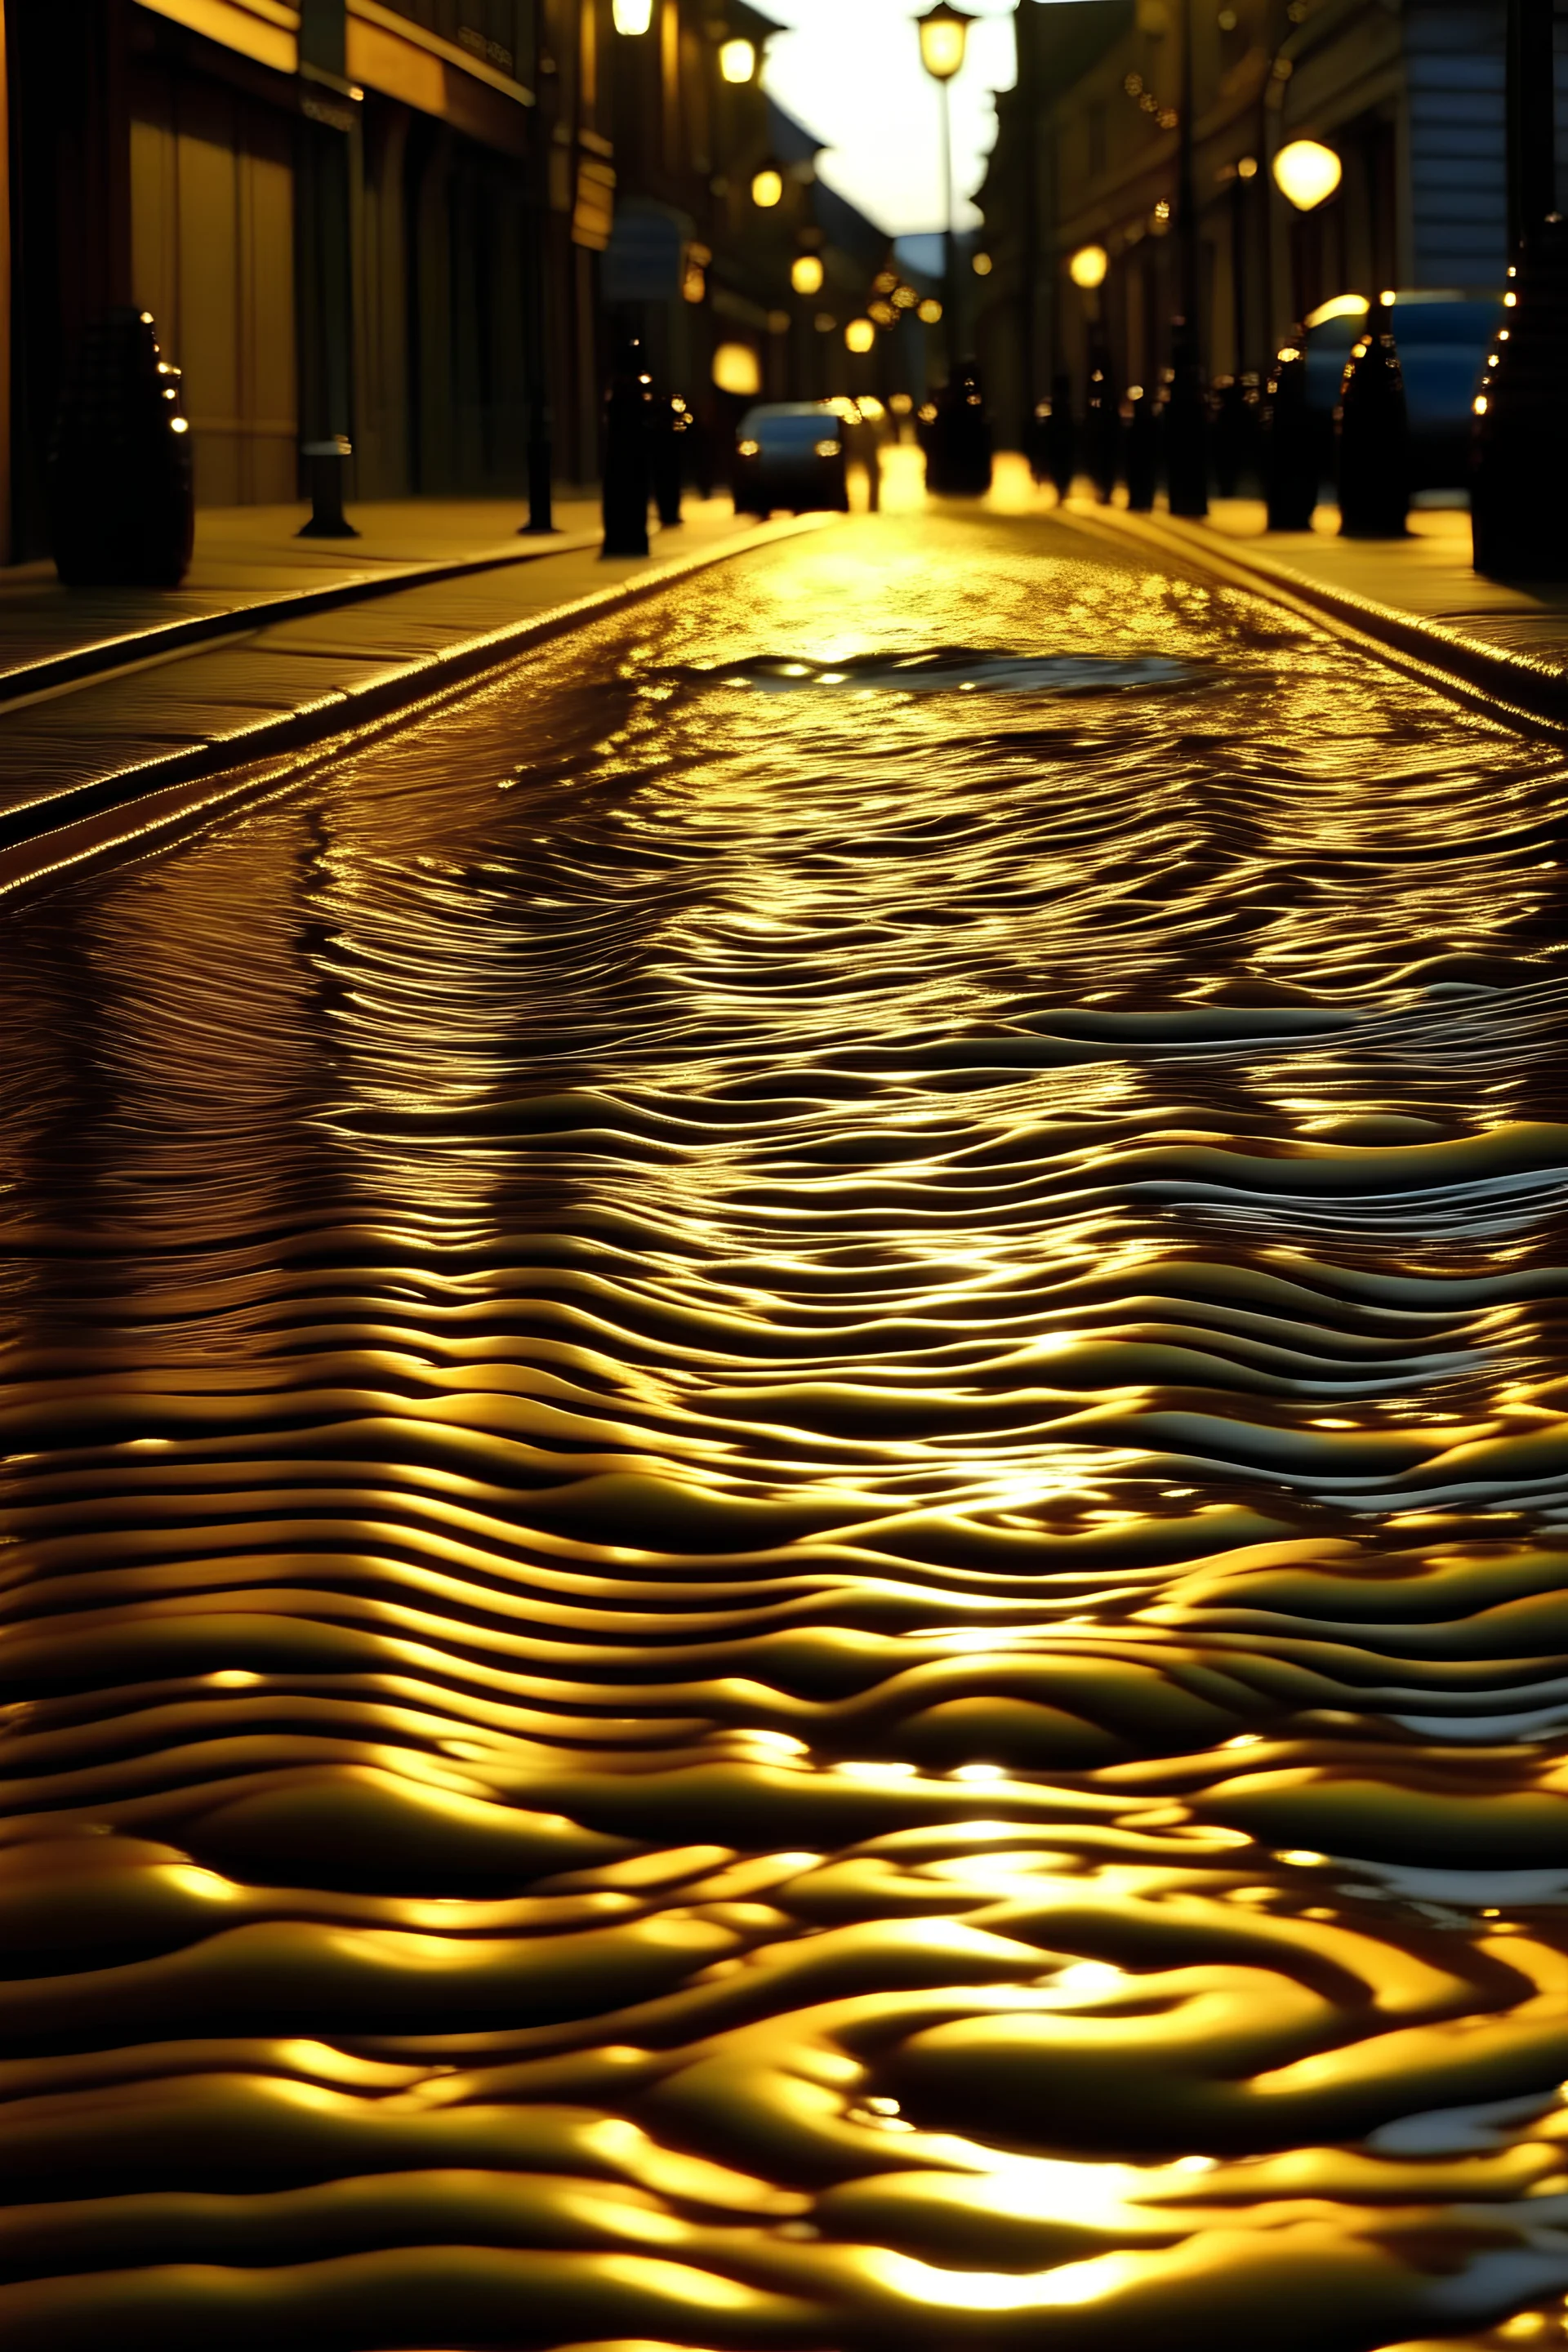 Magical ripples with golden scatterings and street lighting